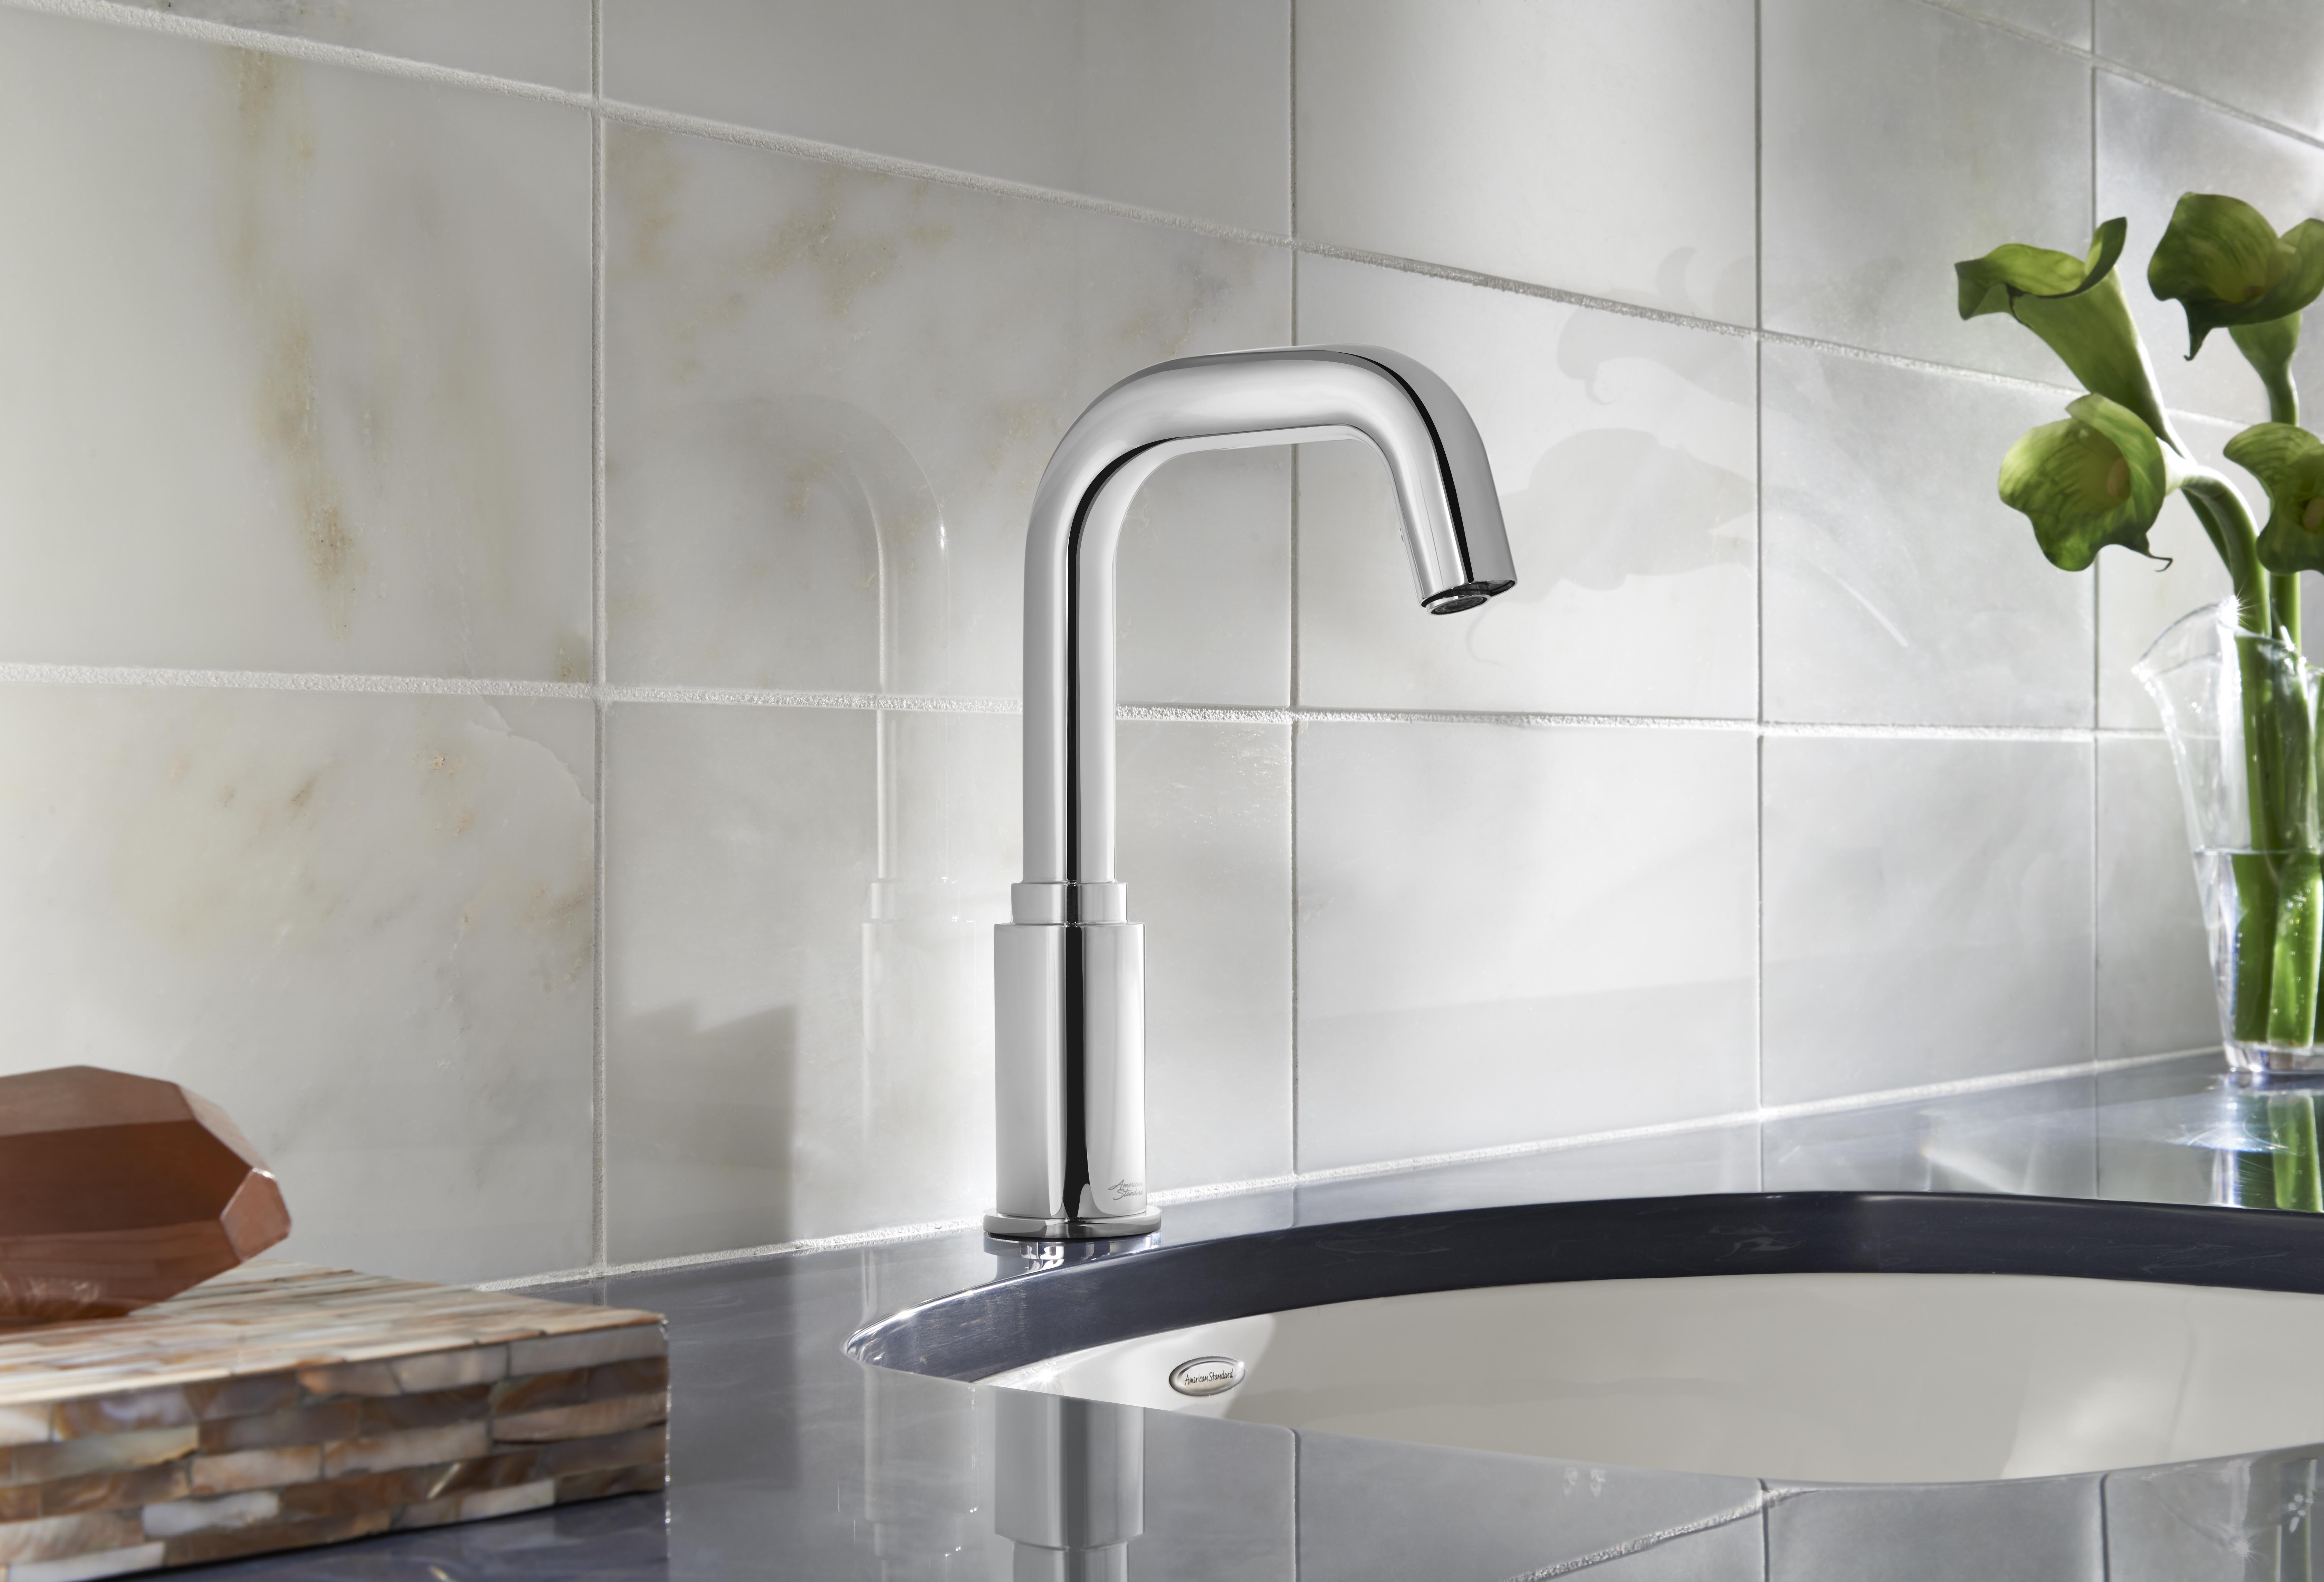 Serin™ Touchless Faucet, Base Model, 1.5 gpm/5.7 Lpm